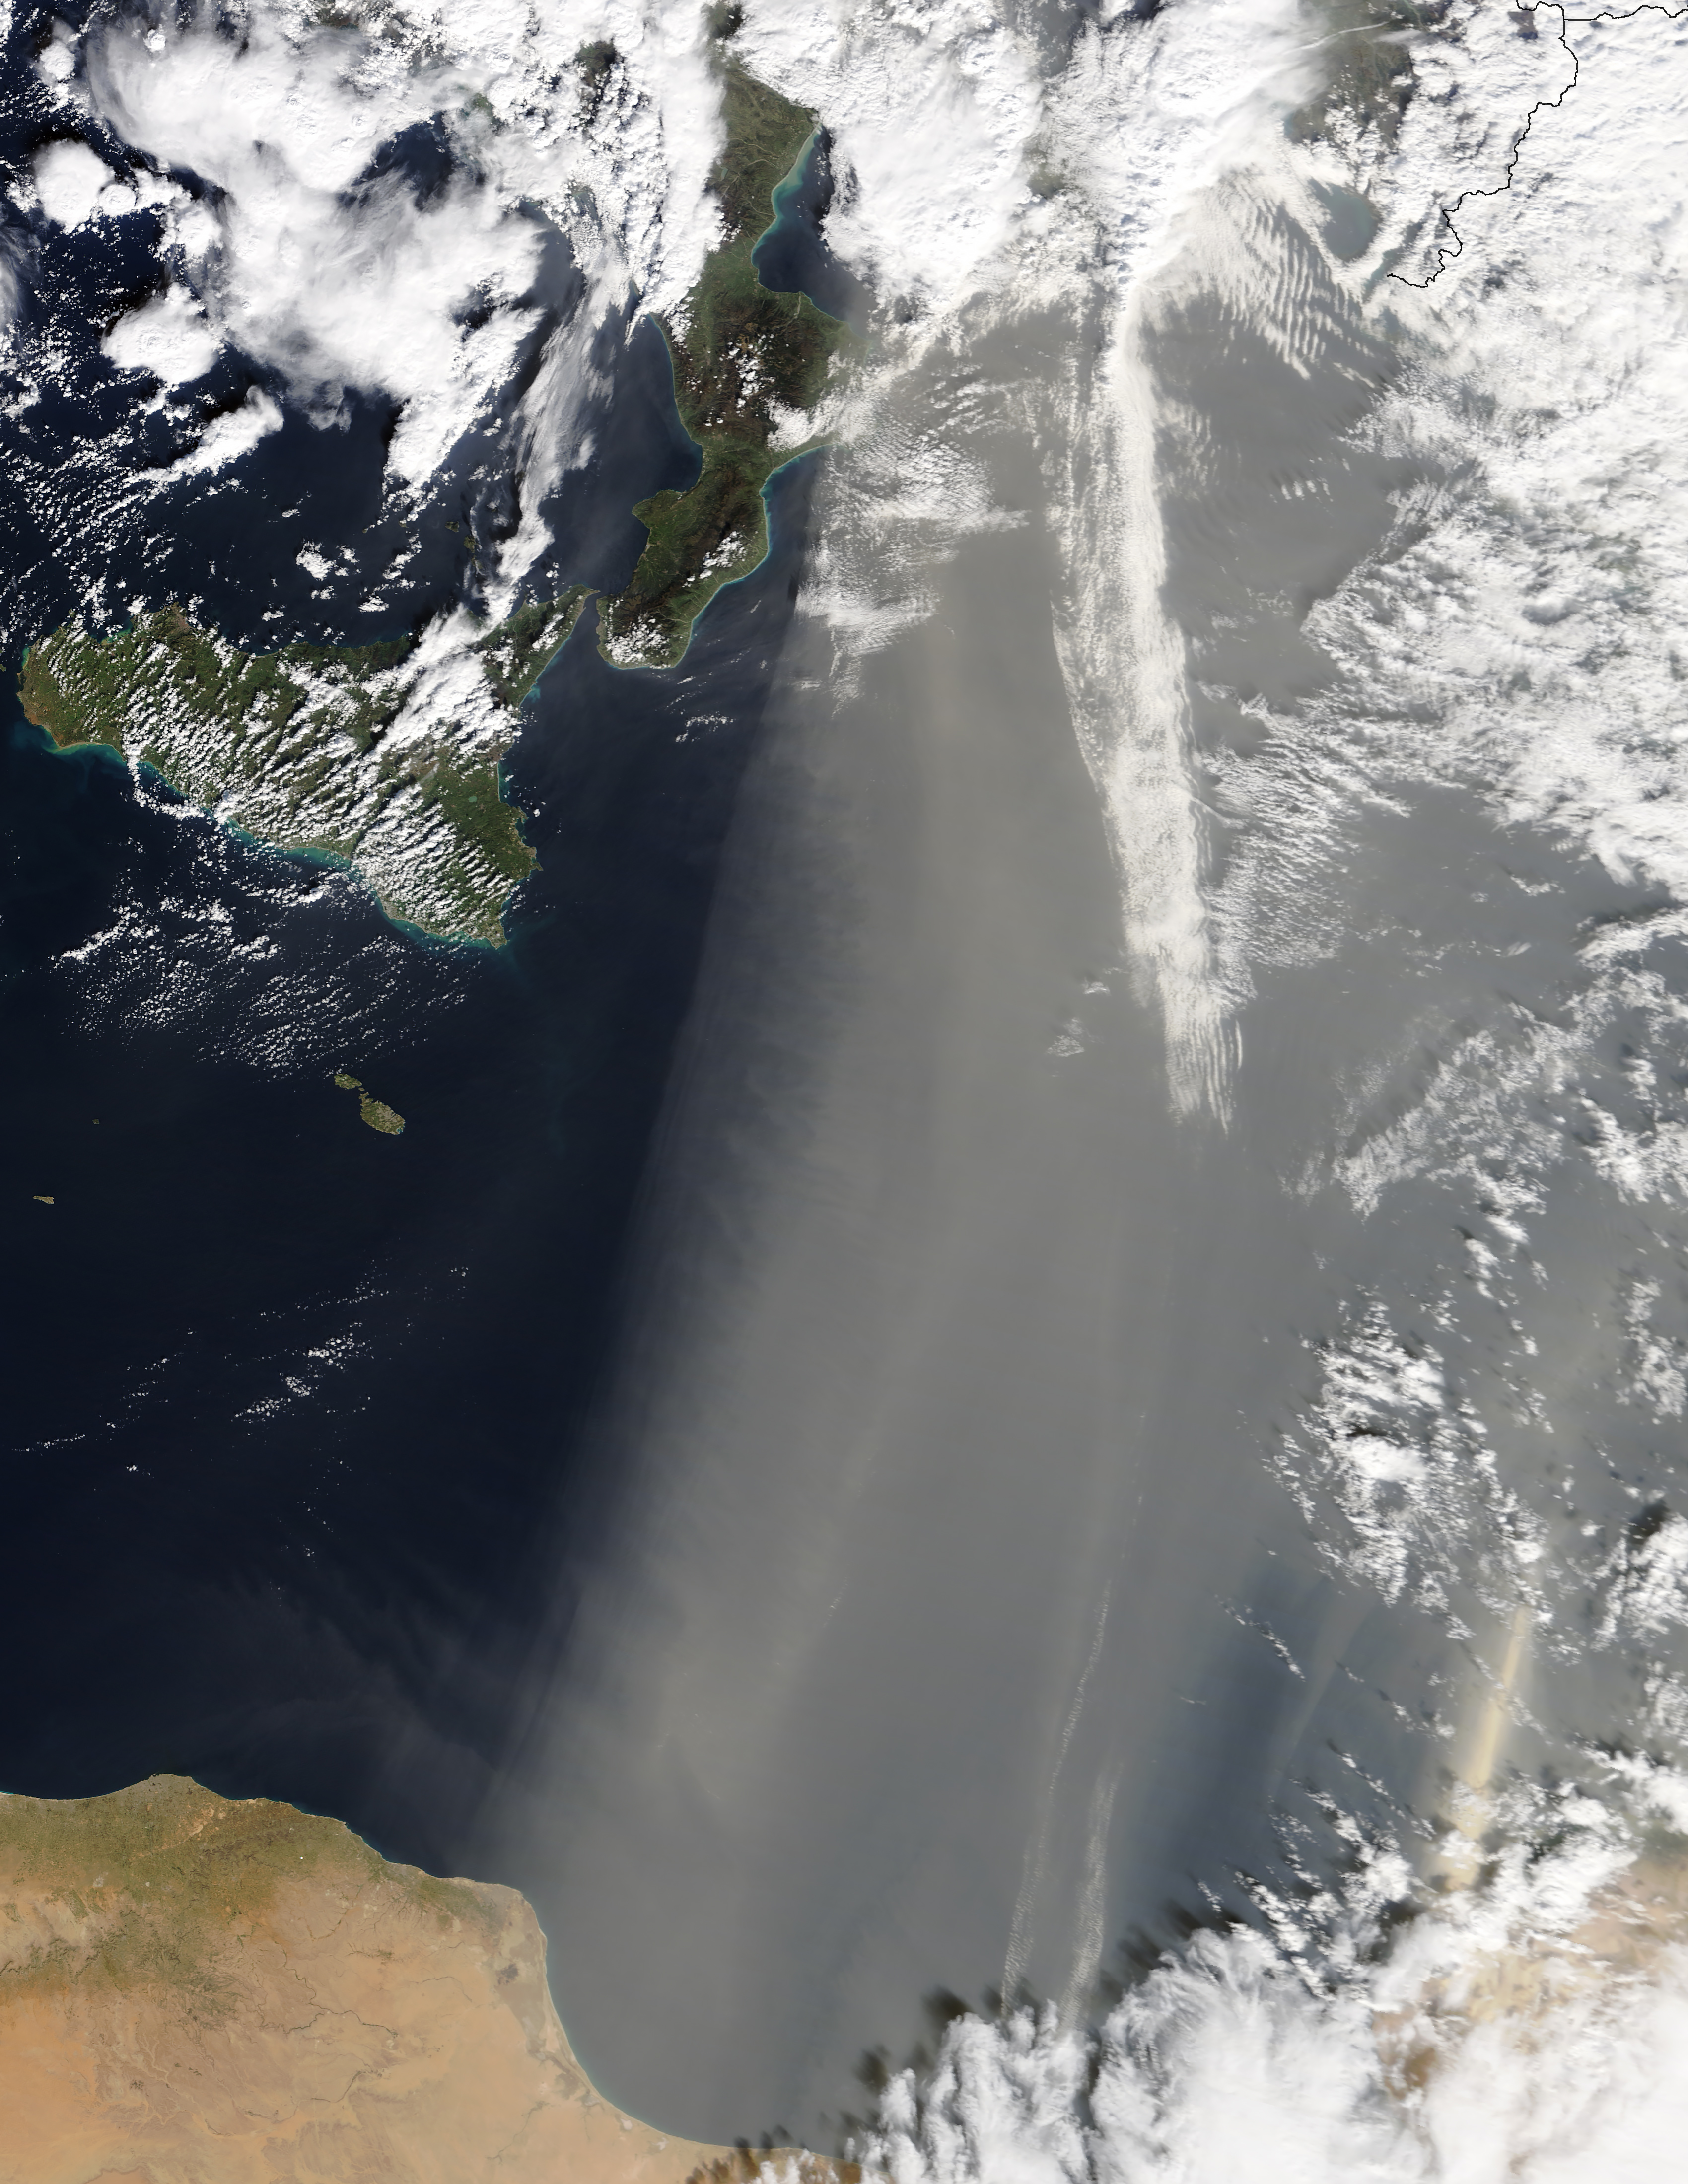 Dust Storm Over the Mediterranean Sea - related image preview